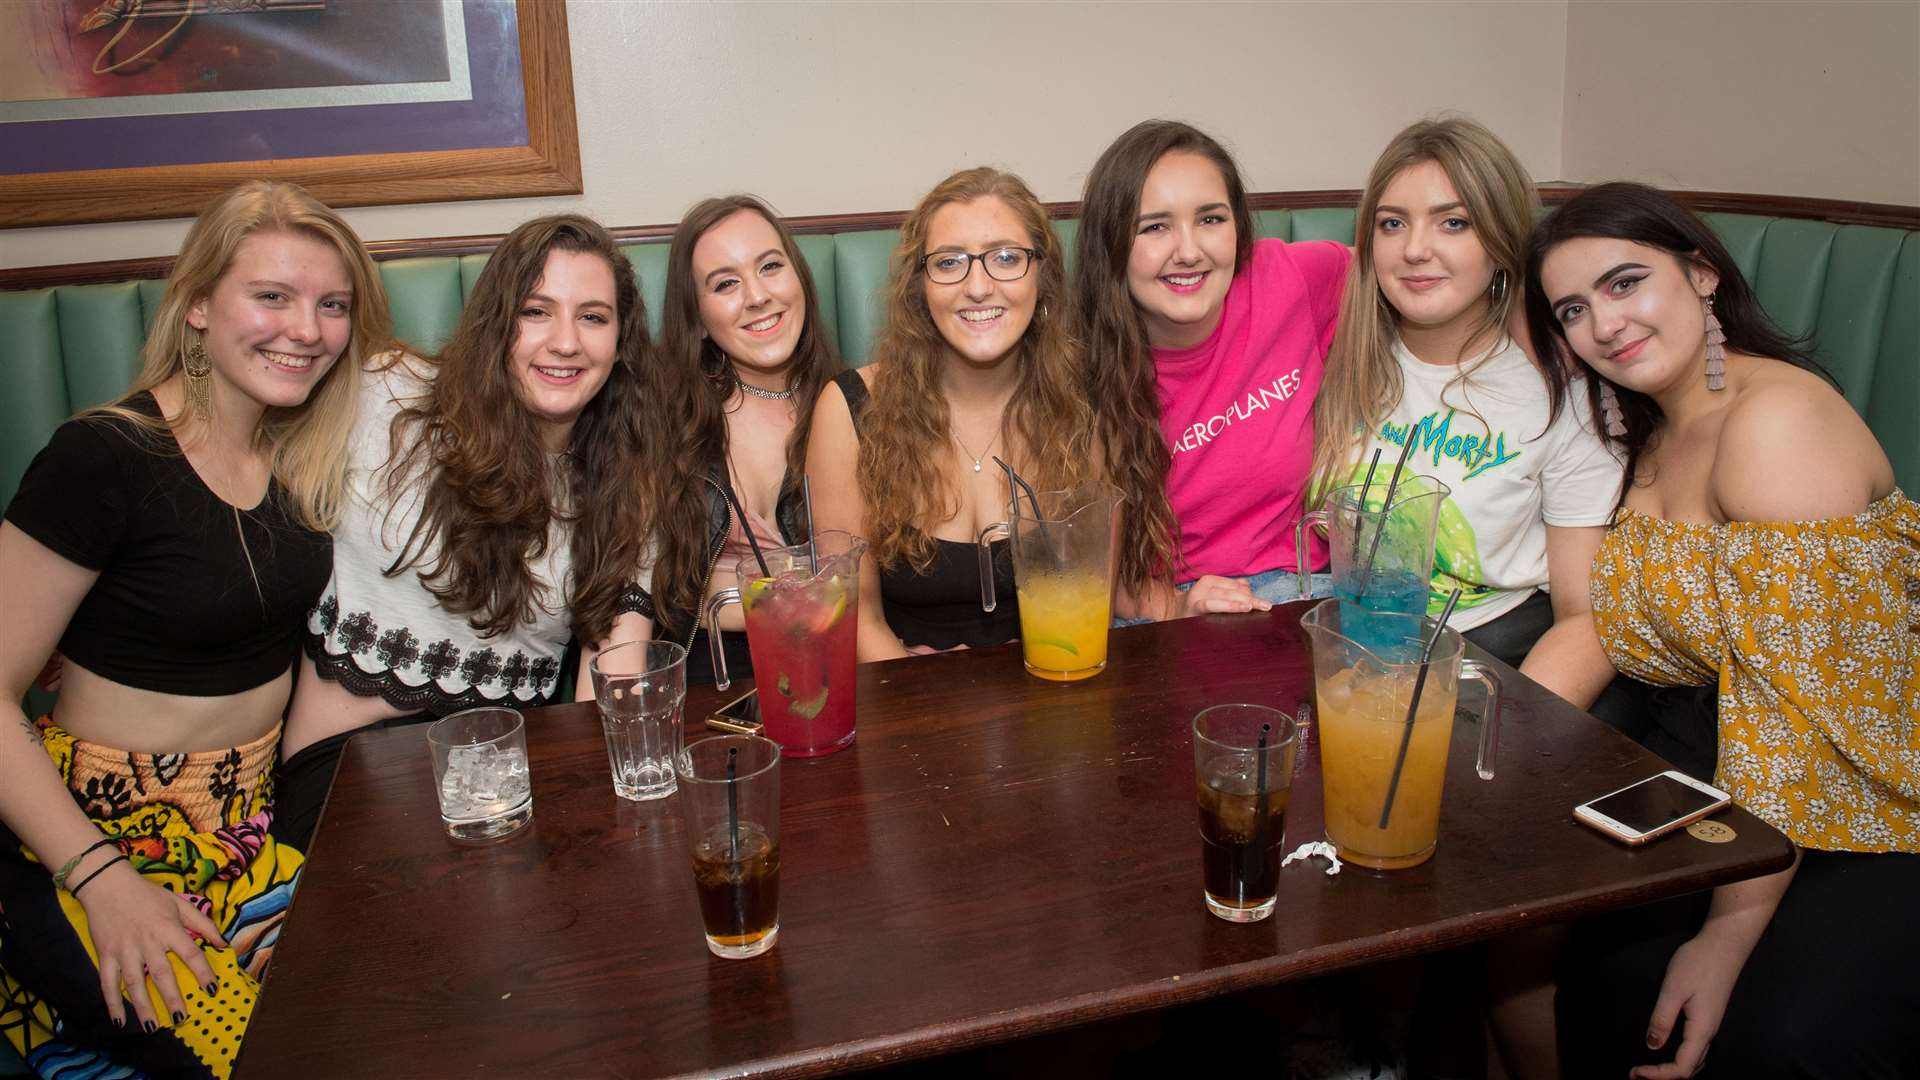 Rachel Kellow (centre) organised a night out for her friends.